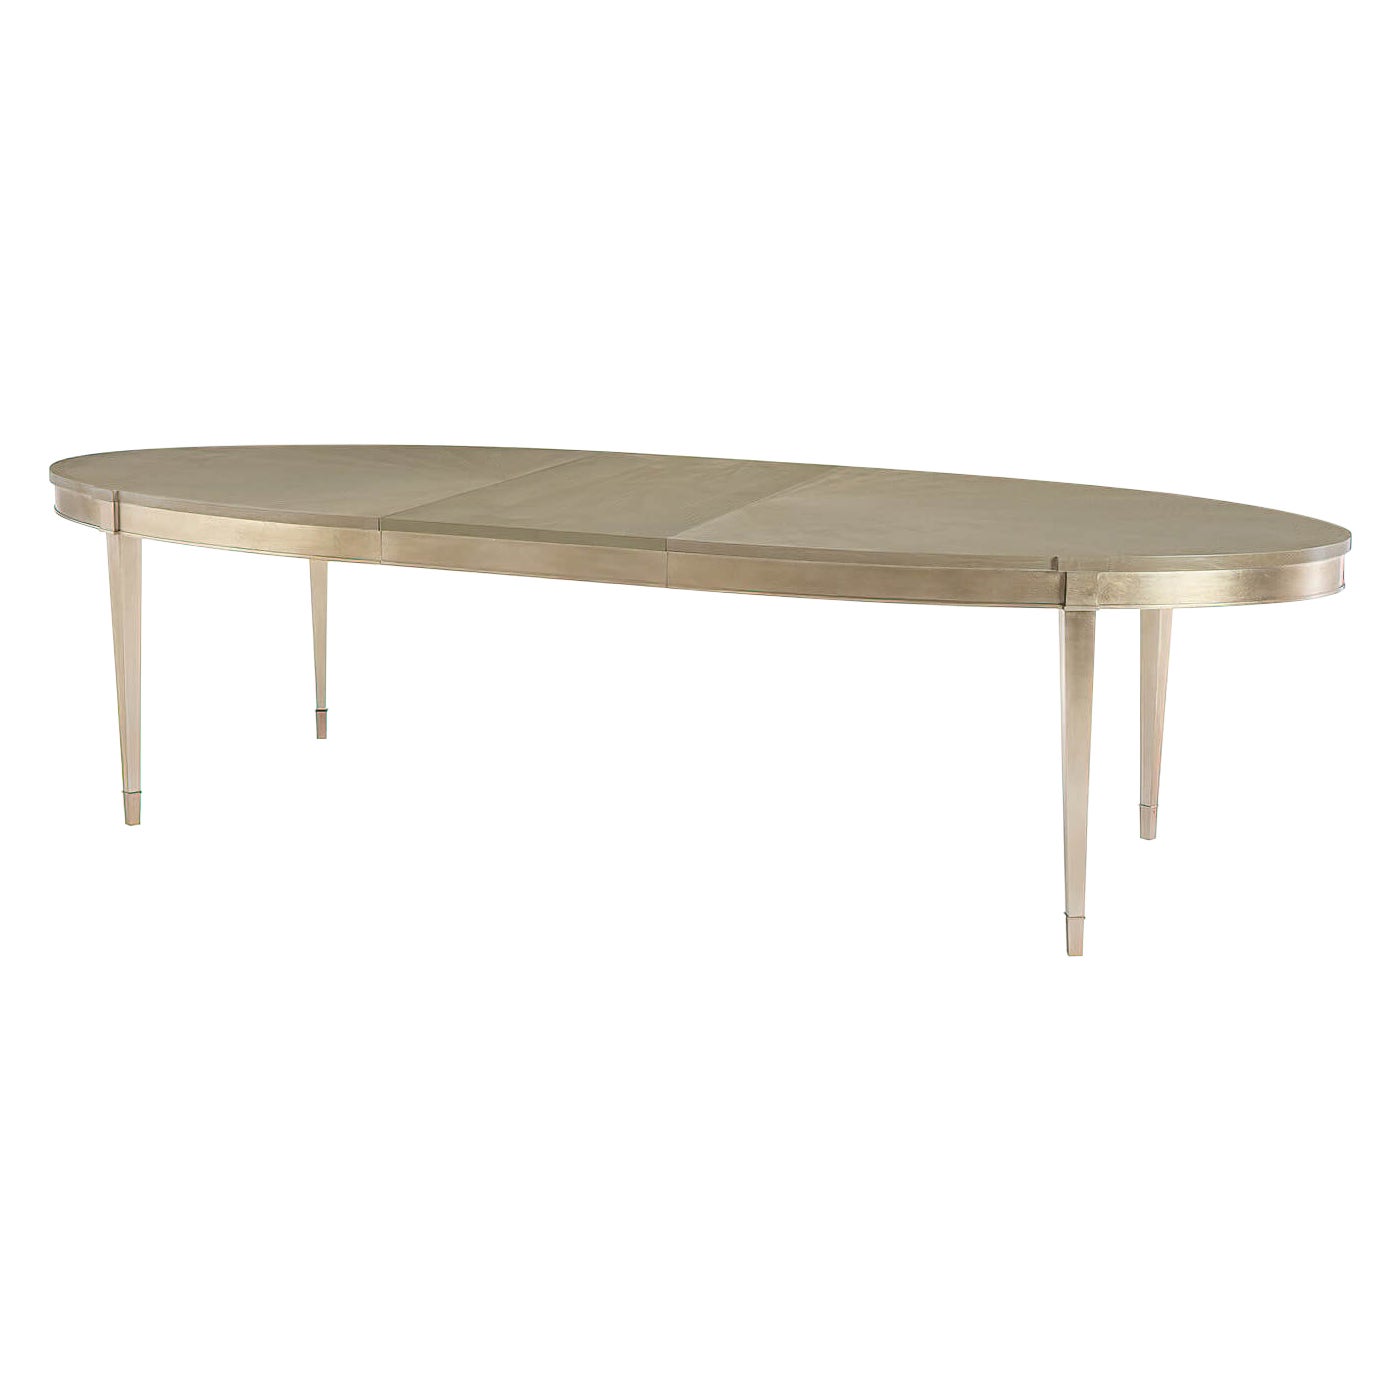 French Neoclassical Oval Extending Dining Table